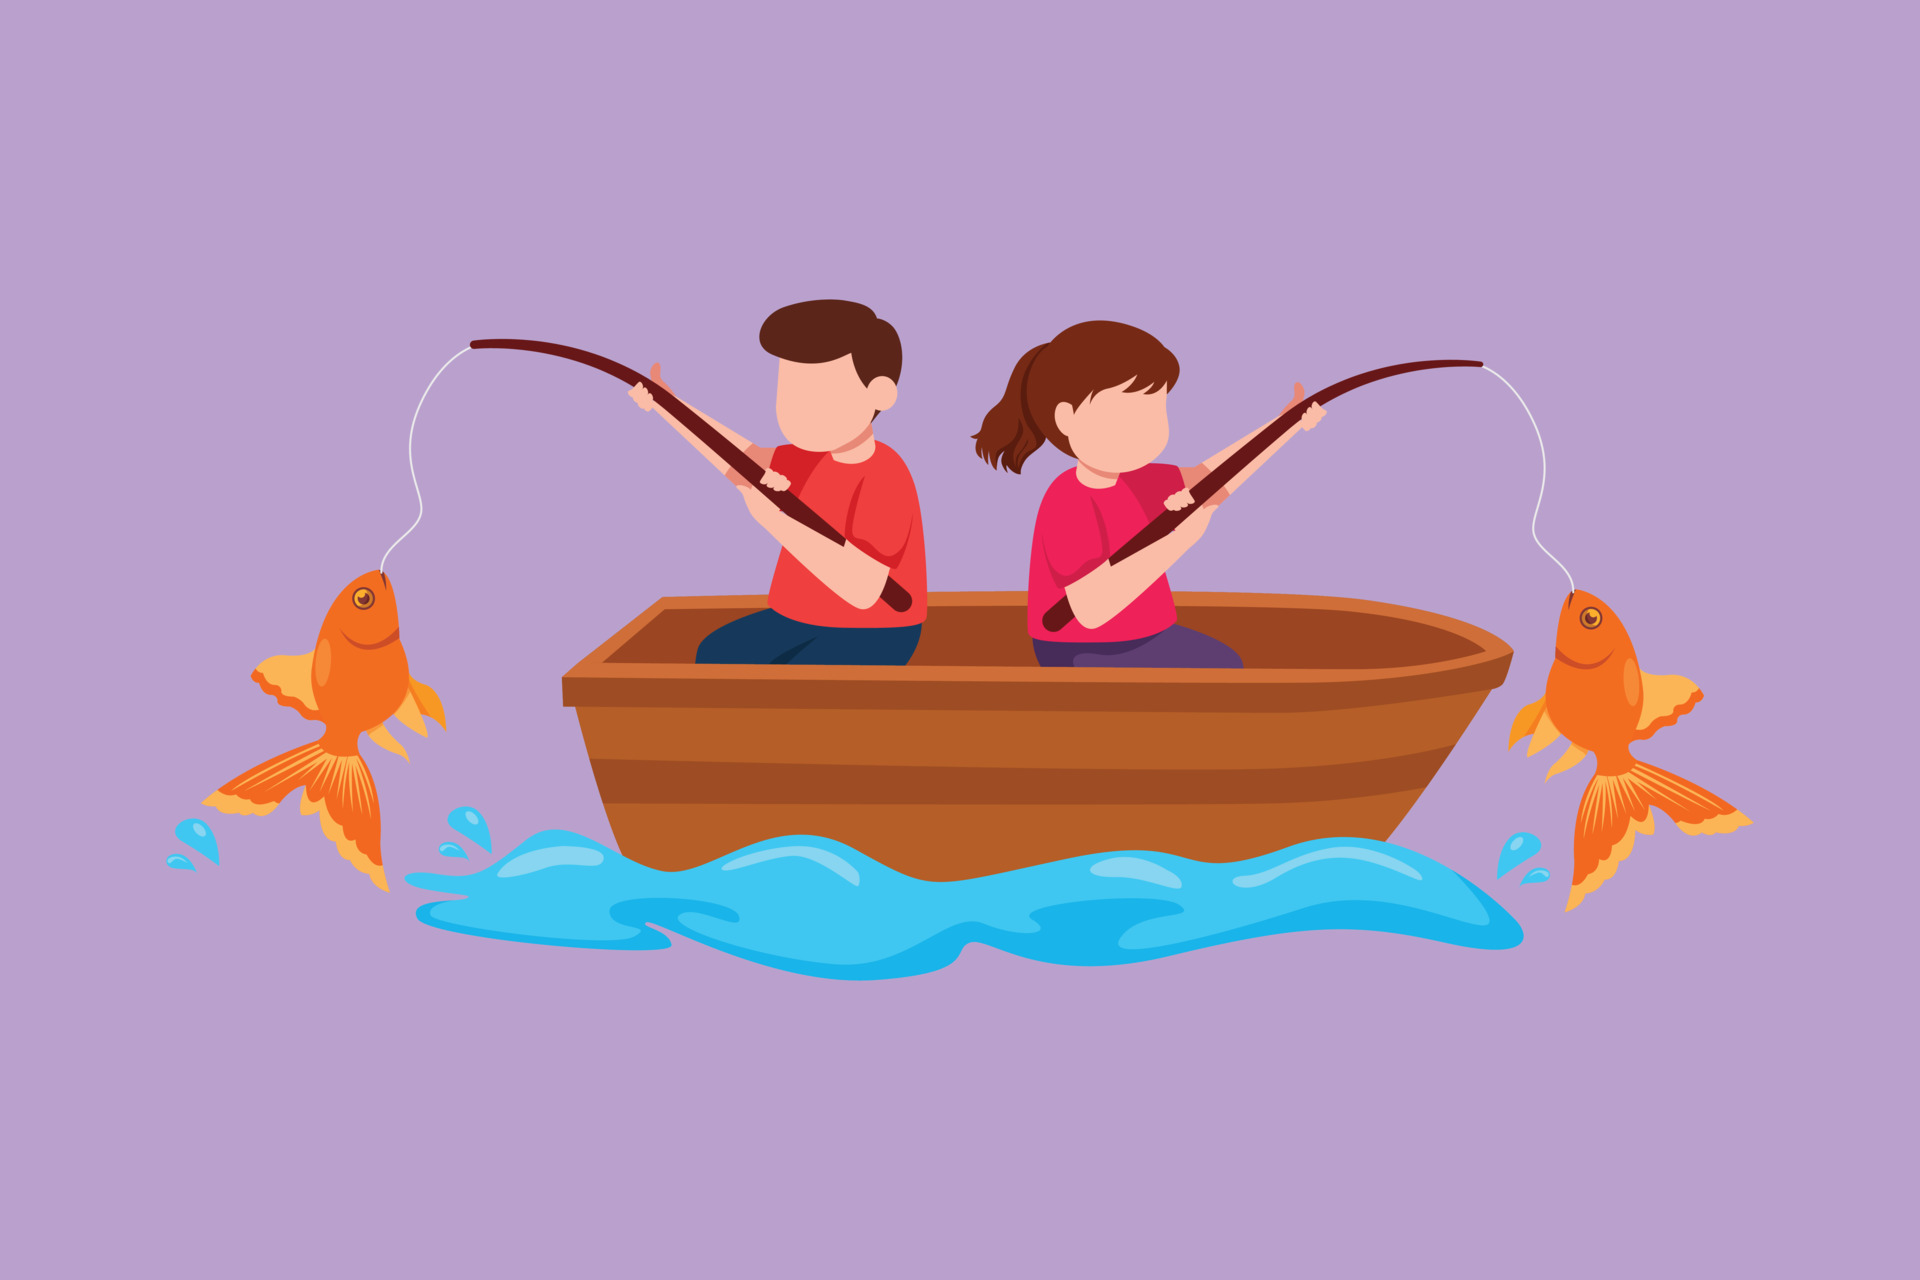 Cartoon flat style drawing smiling little boys and girls fishing together  on boat. Happy children fishing on boat out in the sea. Adorable fisher kids  at small lake. Graphic design vector illustration